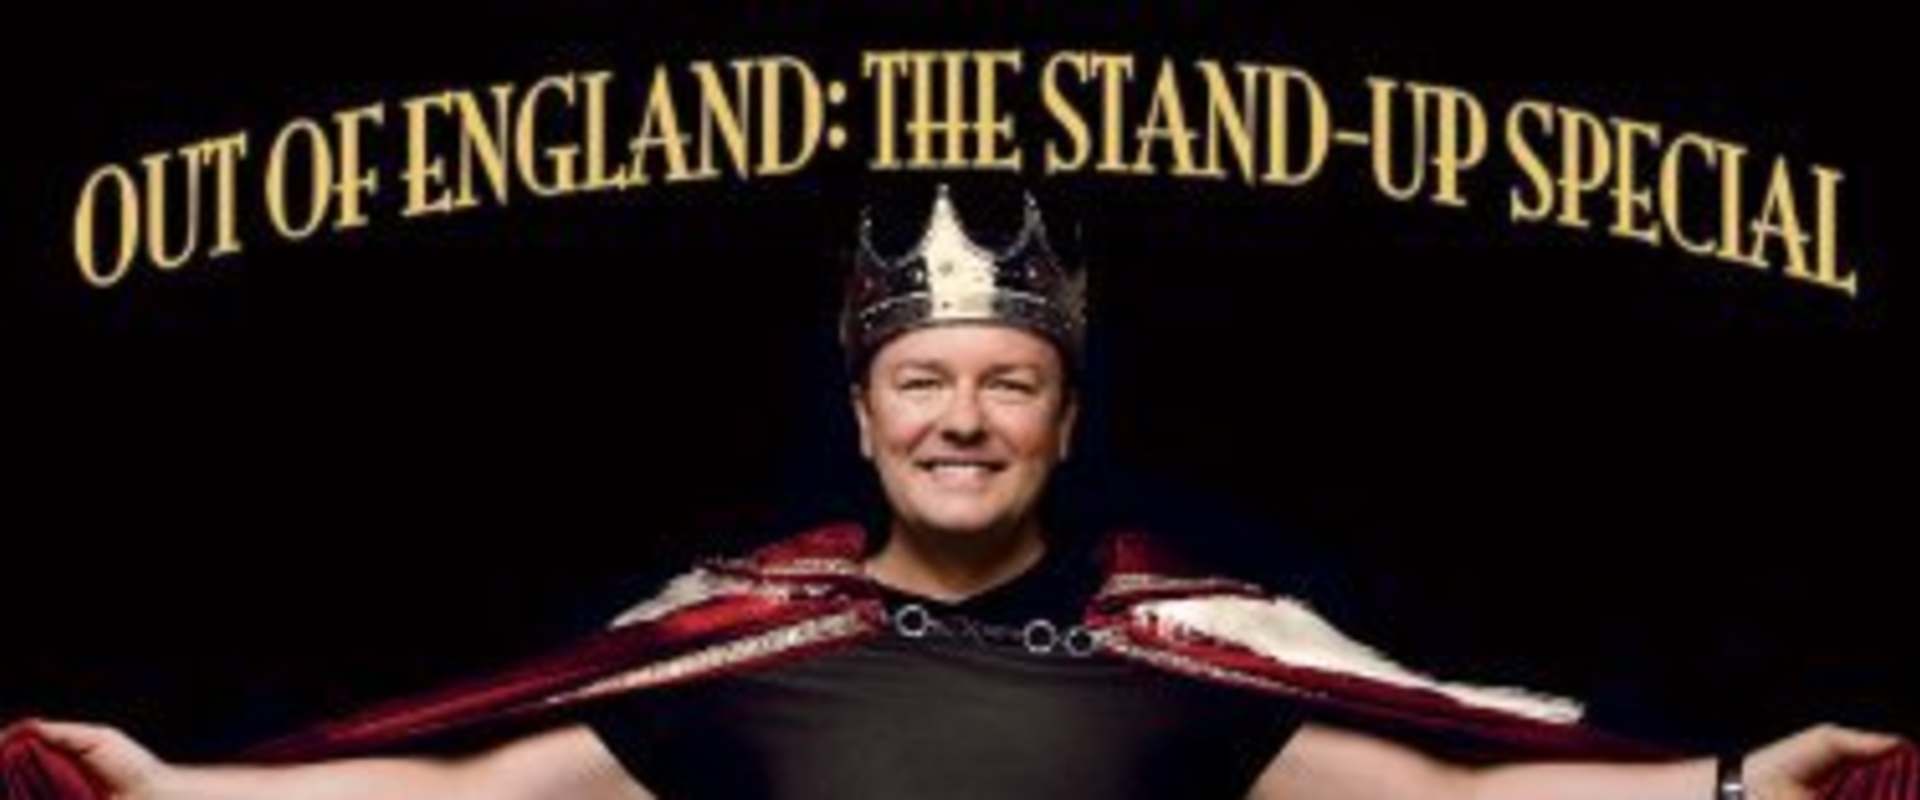 Ricky Gervais: Out of England - The Stand-Up Special background 1